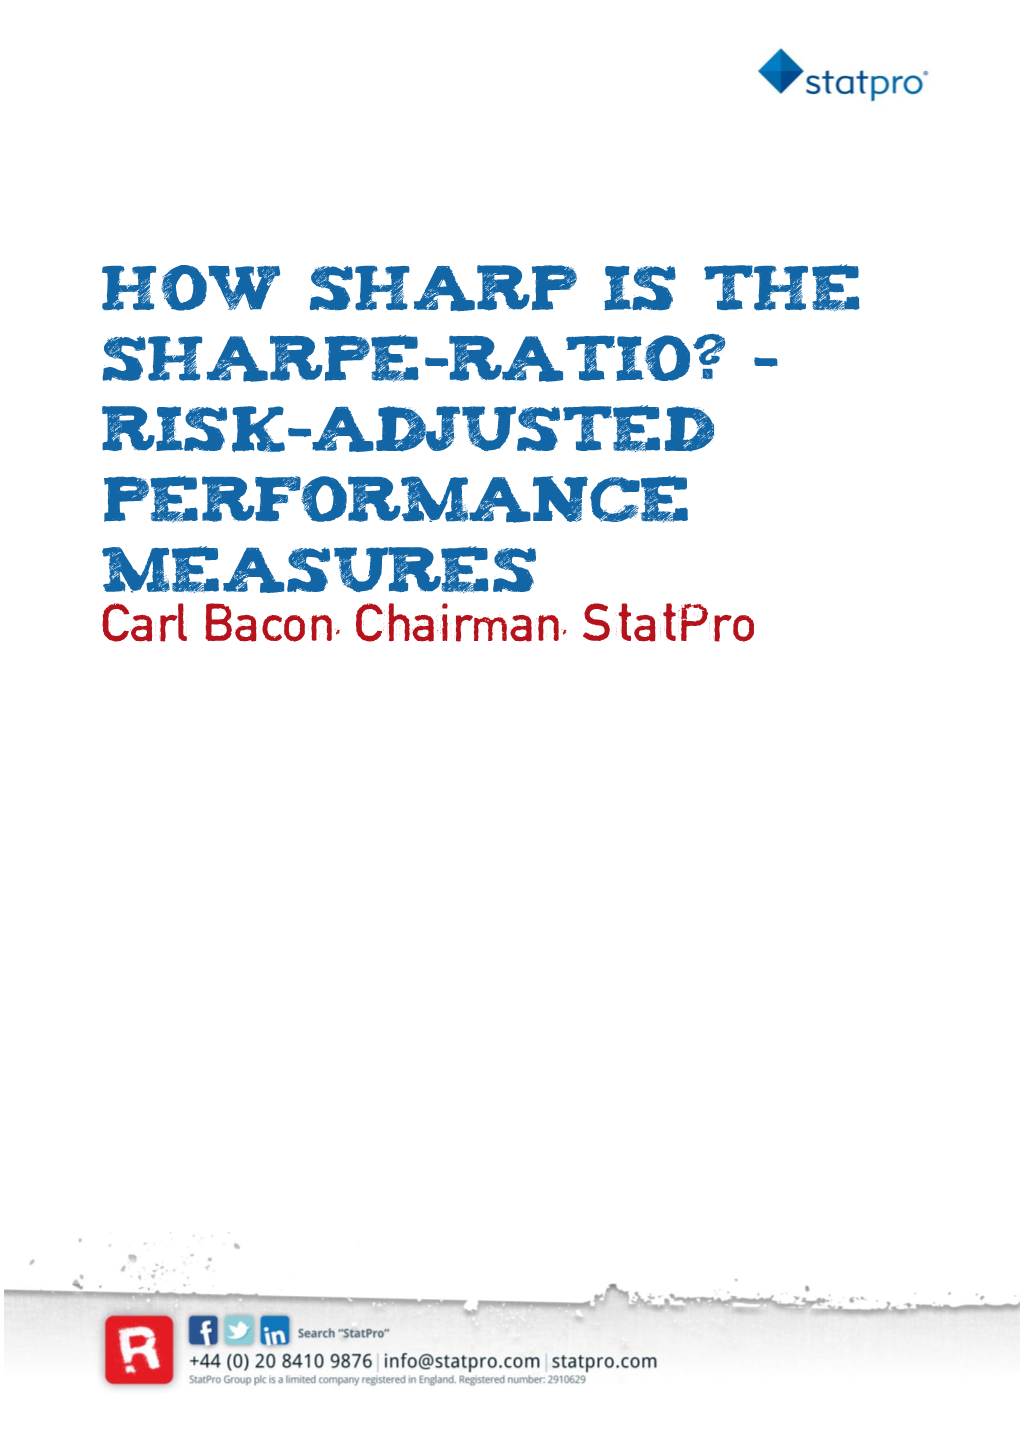 How Sharp Is the Sharpe-Ratio? - Risk-Adjusted Performance Measures Carl Bacon, Chairman, Statpro